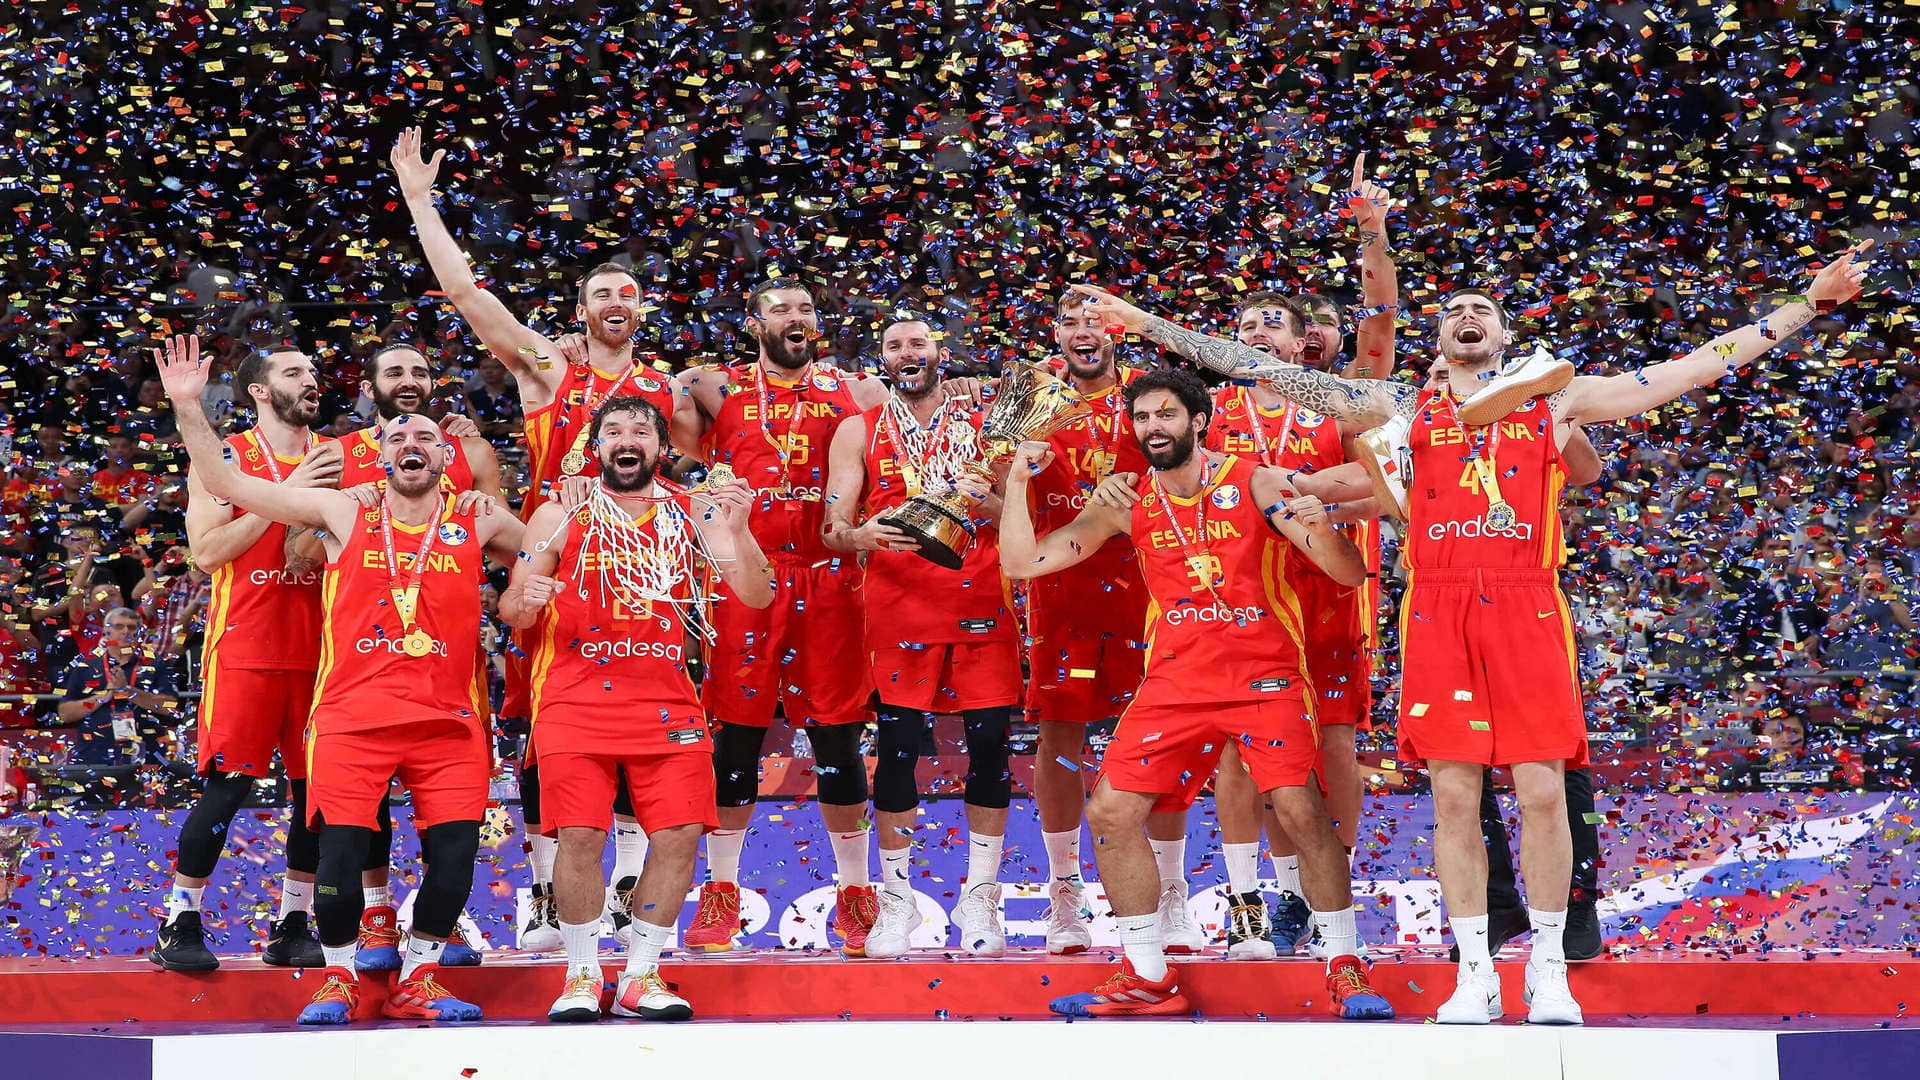 Spain - Best basketball teams in the world